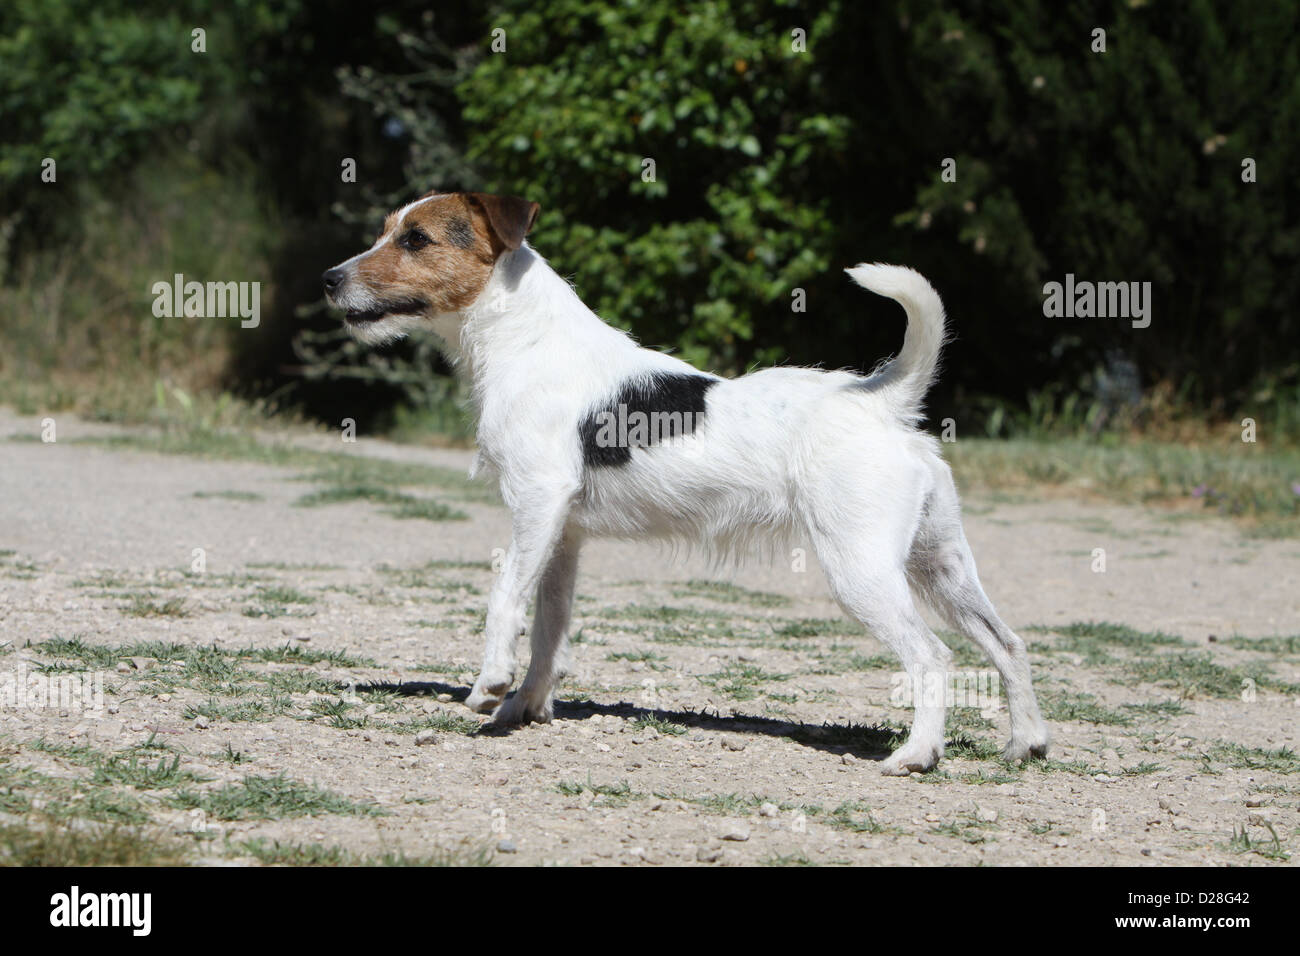 Dog Parson Russell Terrier adult standing paw raised Stock Photo - Alamy